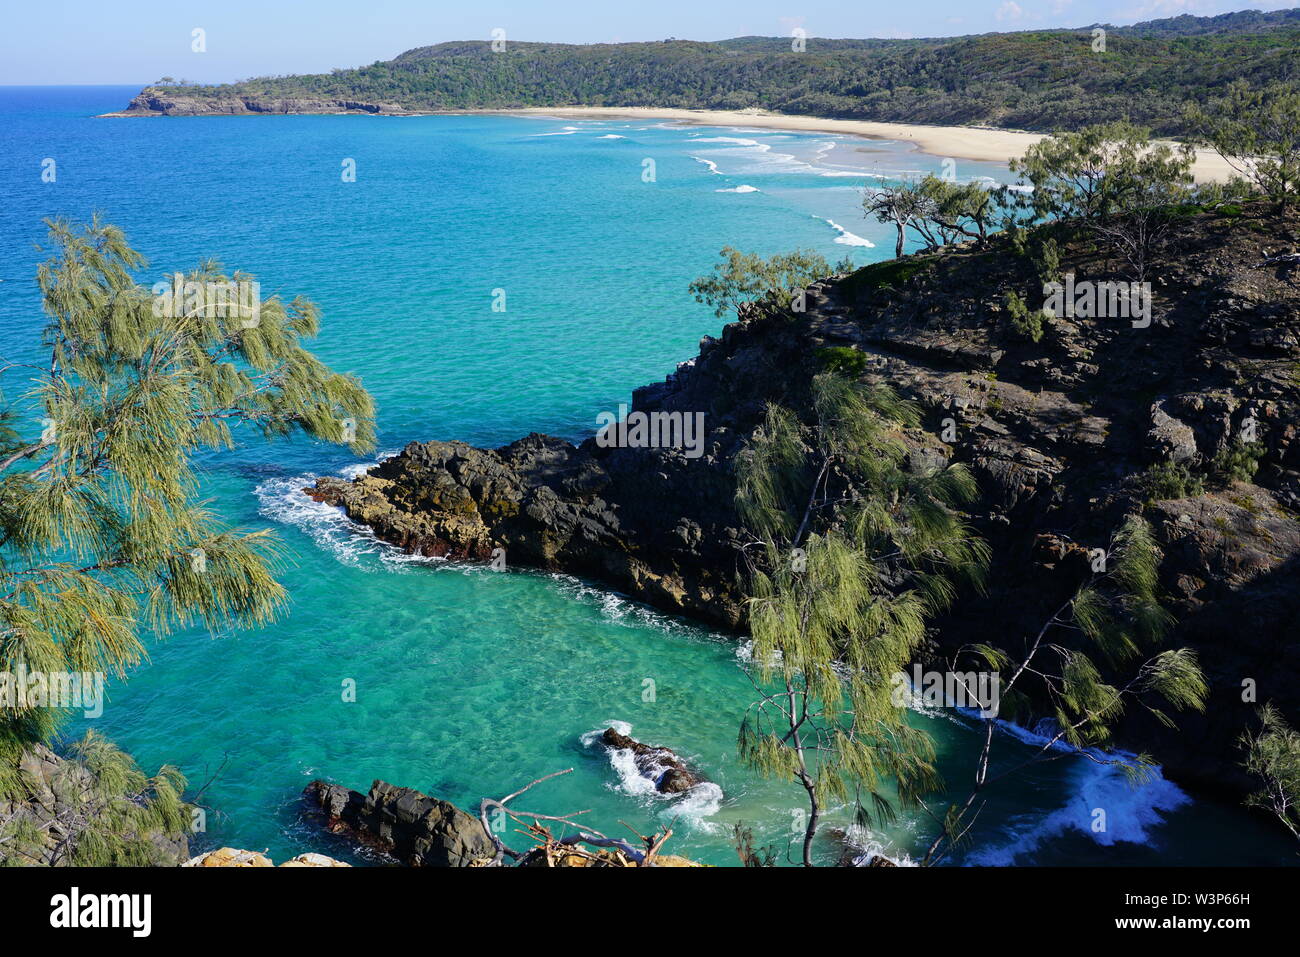 View of Dolphin Point in the Noosa National Park in Noosa, Sunshine Coast, Queensland, Australia Stock Photo